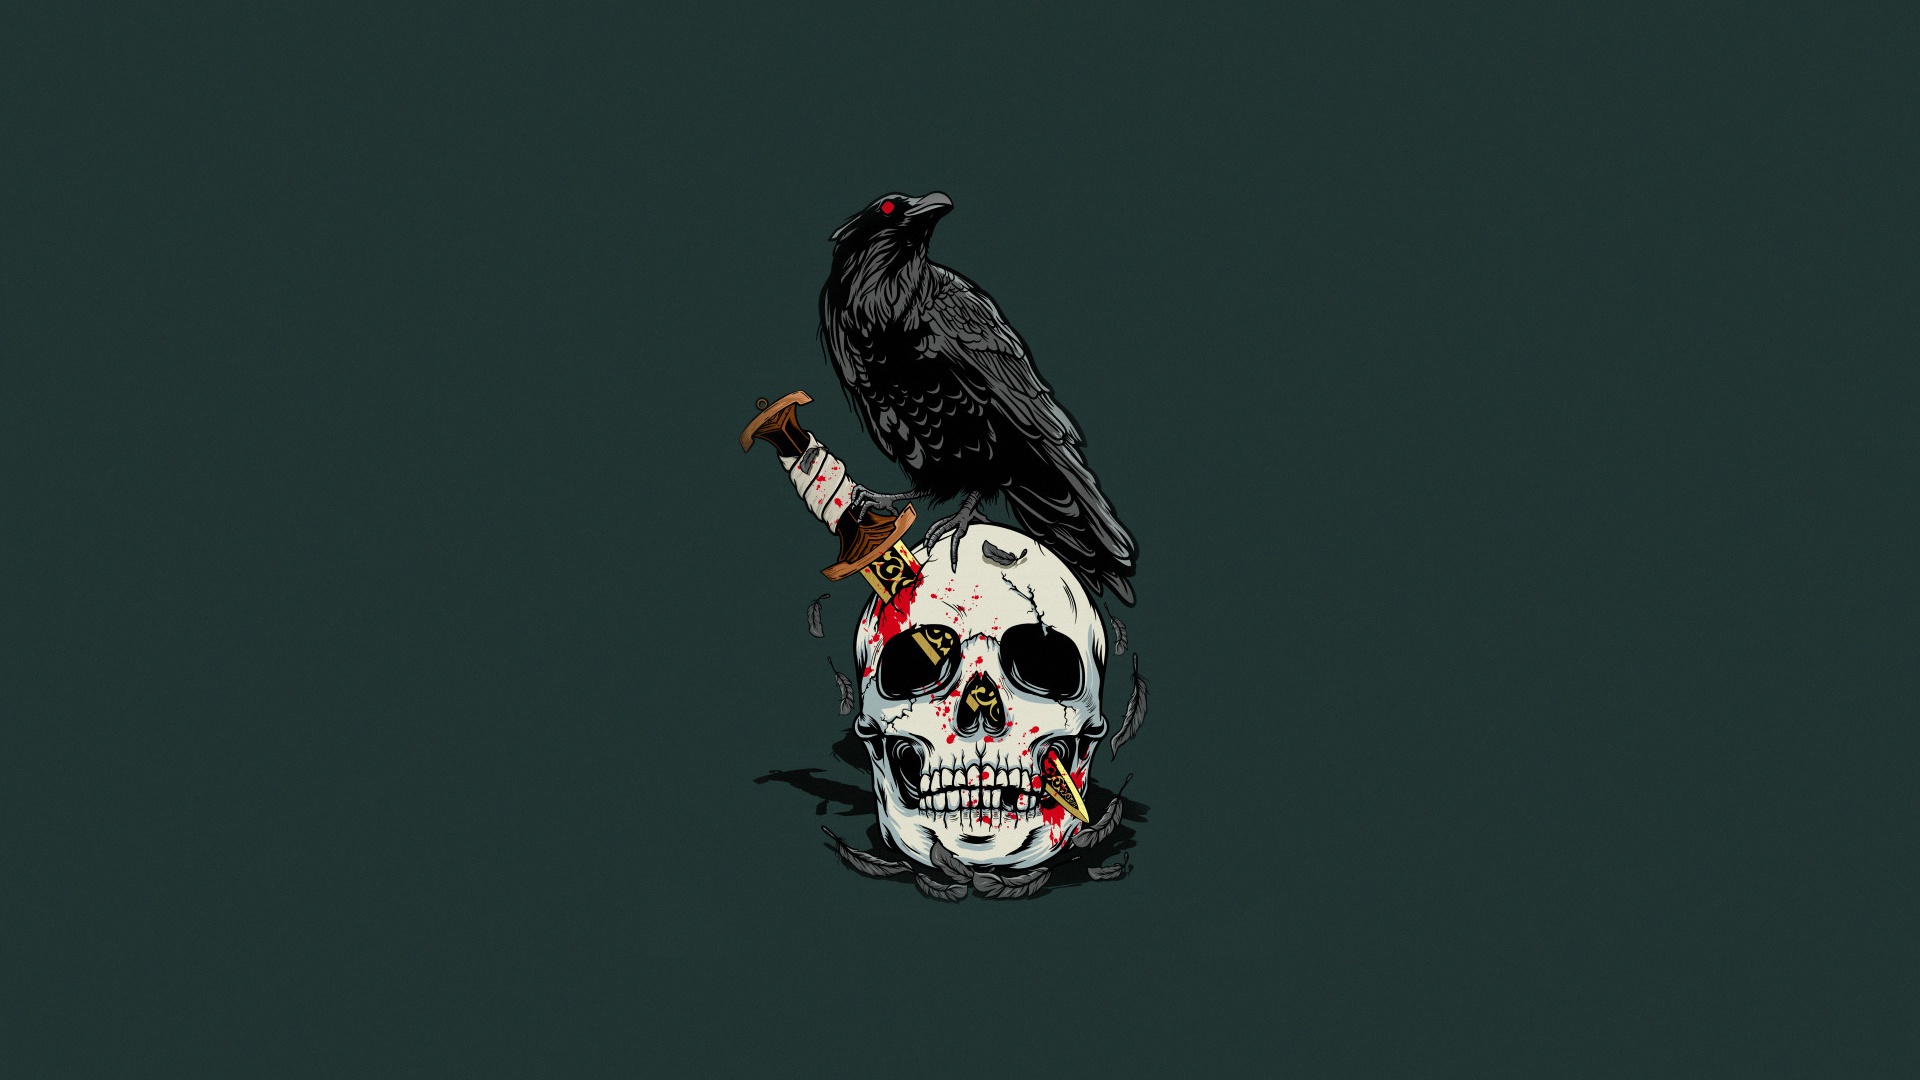 General 1920x1080 birds skull artwork simple background raven green green background blood knife teeth animals feathers